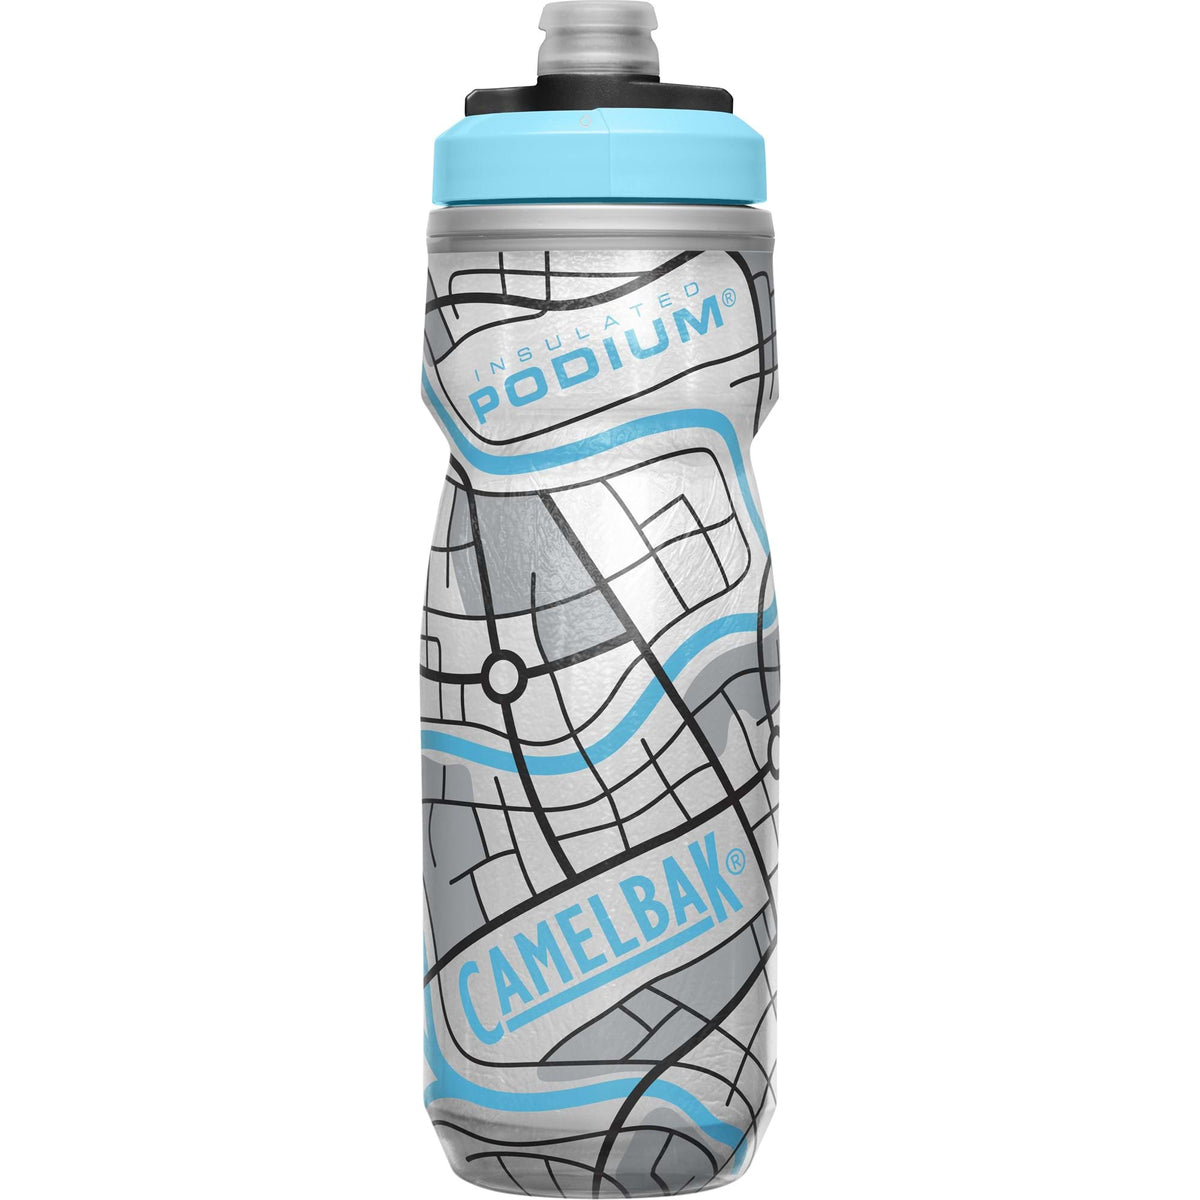 Camelbak Podium Chill Insulated Bottle 600ml (Limited Edition)